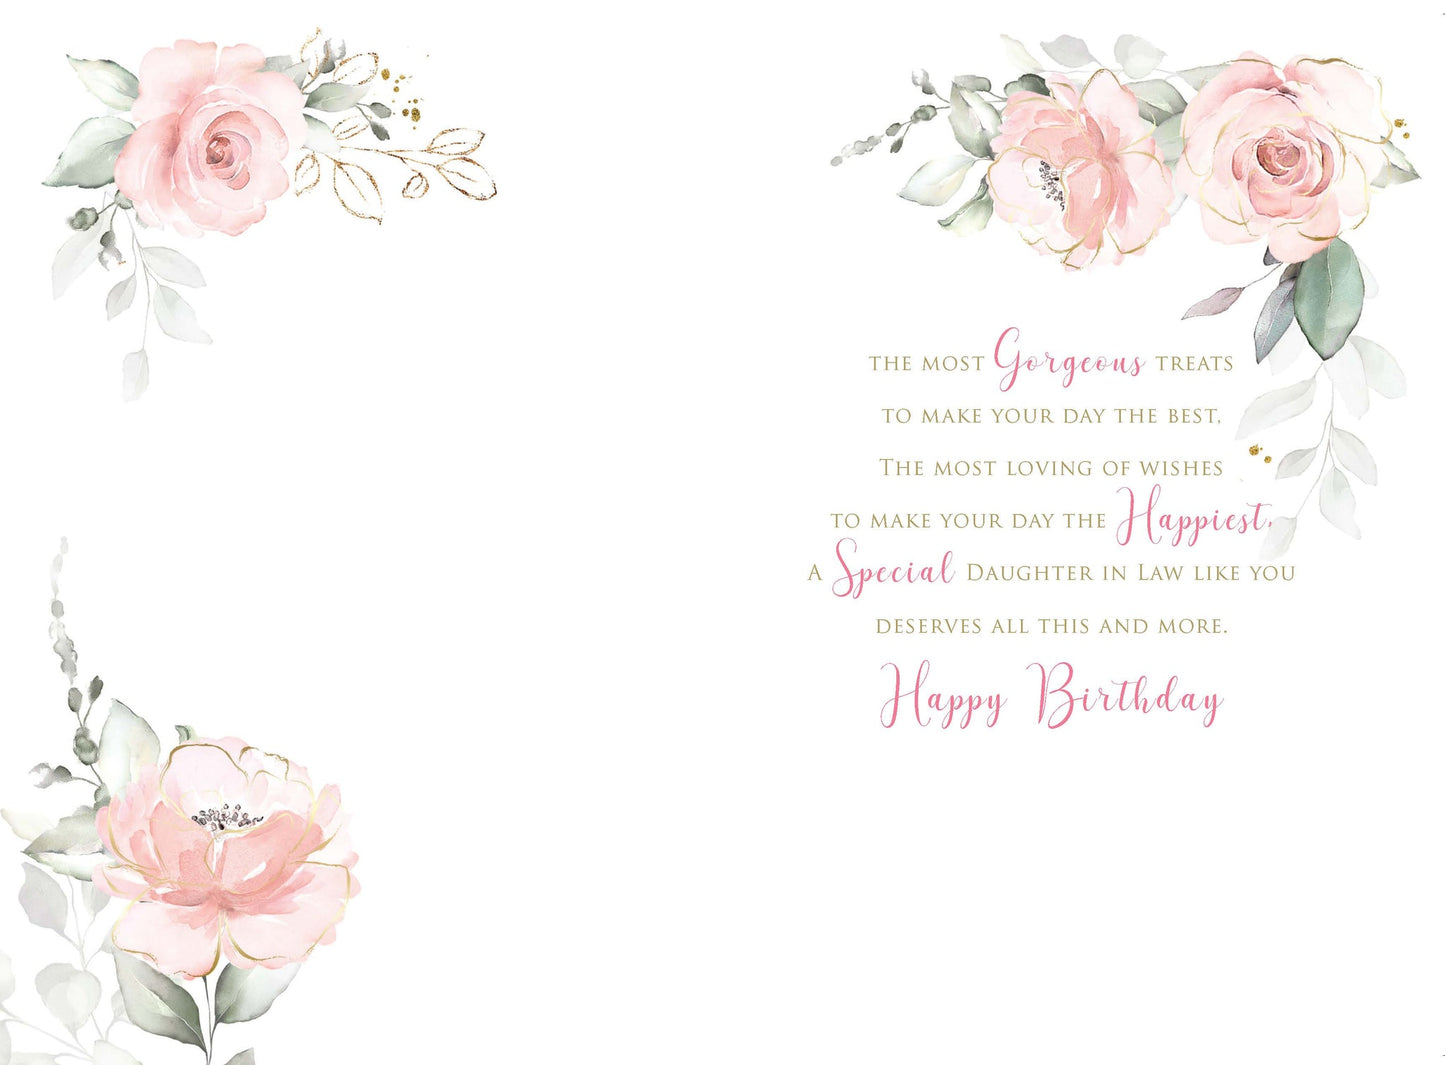 Daughter In Law Birthday Rose Wreath Greeting Card (inside)